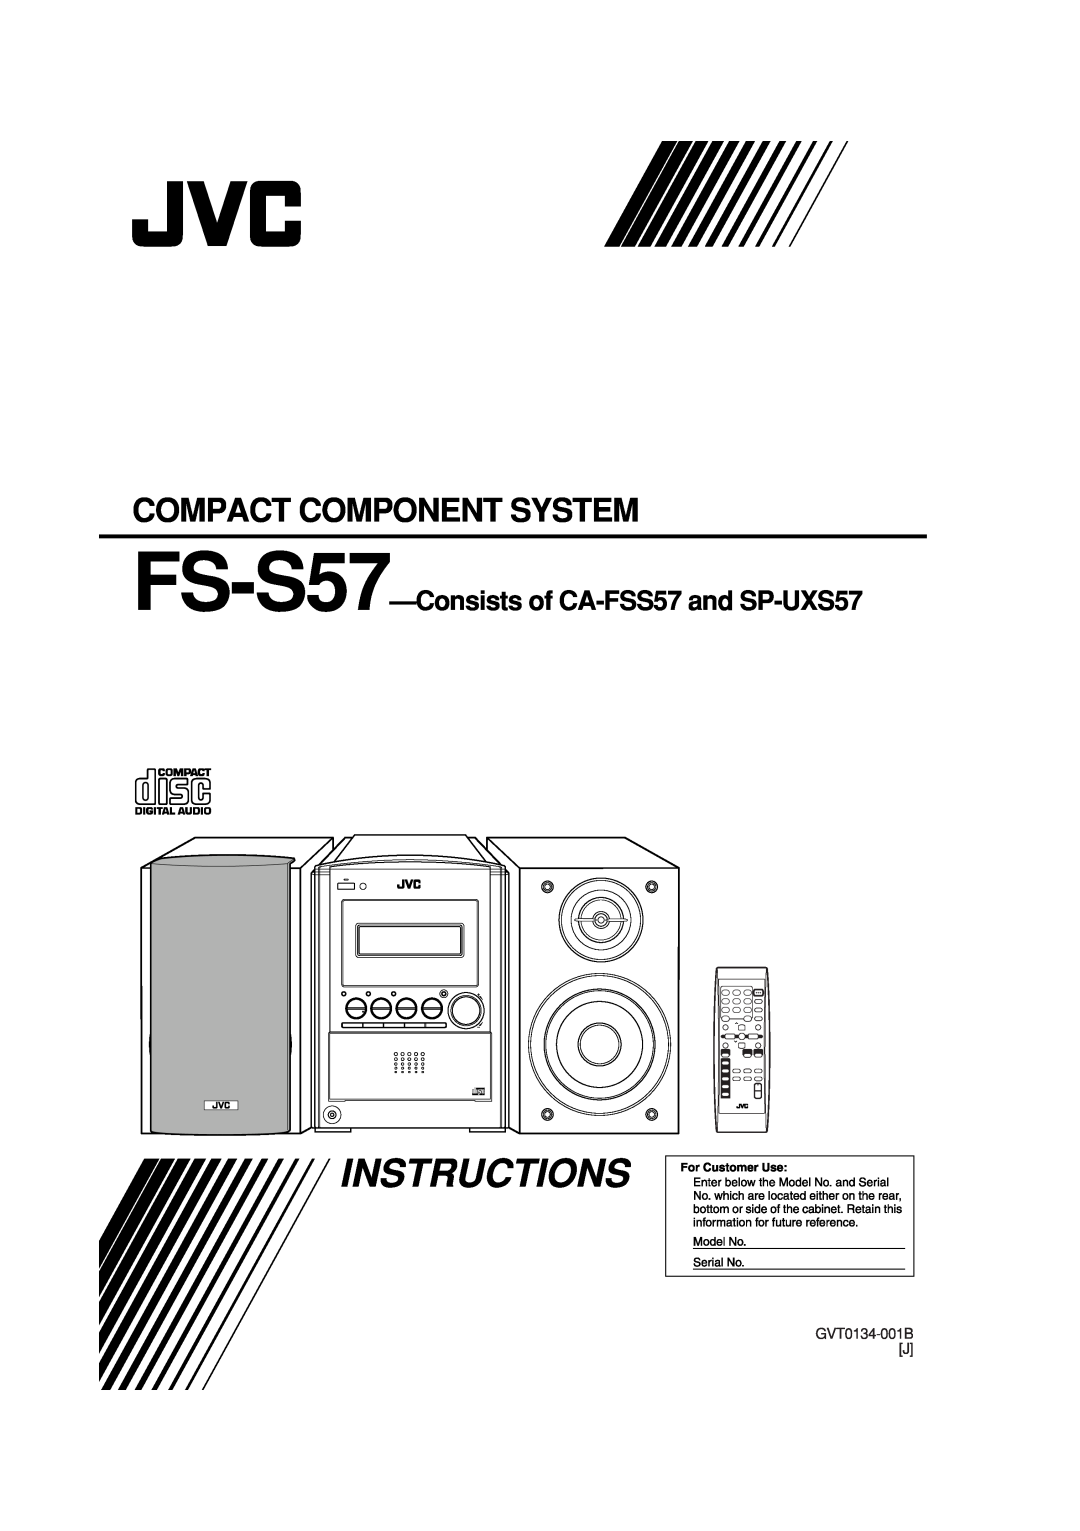 JVC manual Instructions, Compact Component System, FS-S57-Consistsof CA-FSS57and SP-UXS57, GVT0134-001BJ, 5-CD, Ahb Pro 